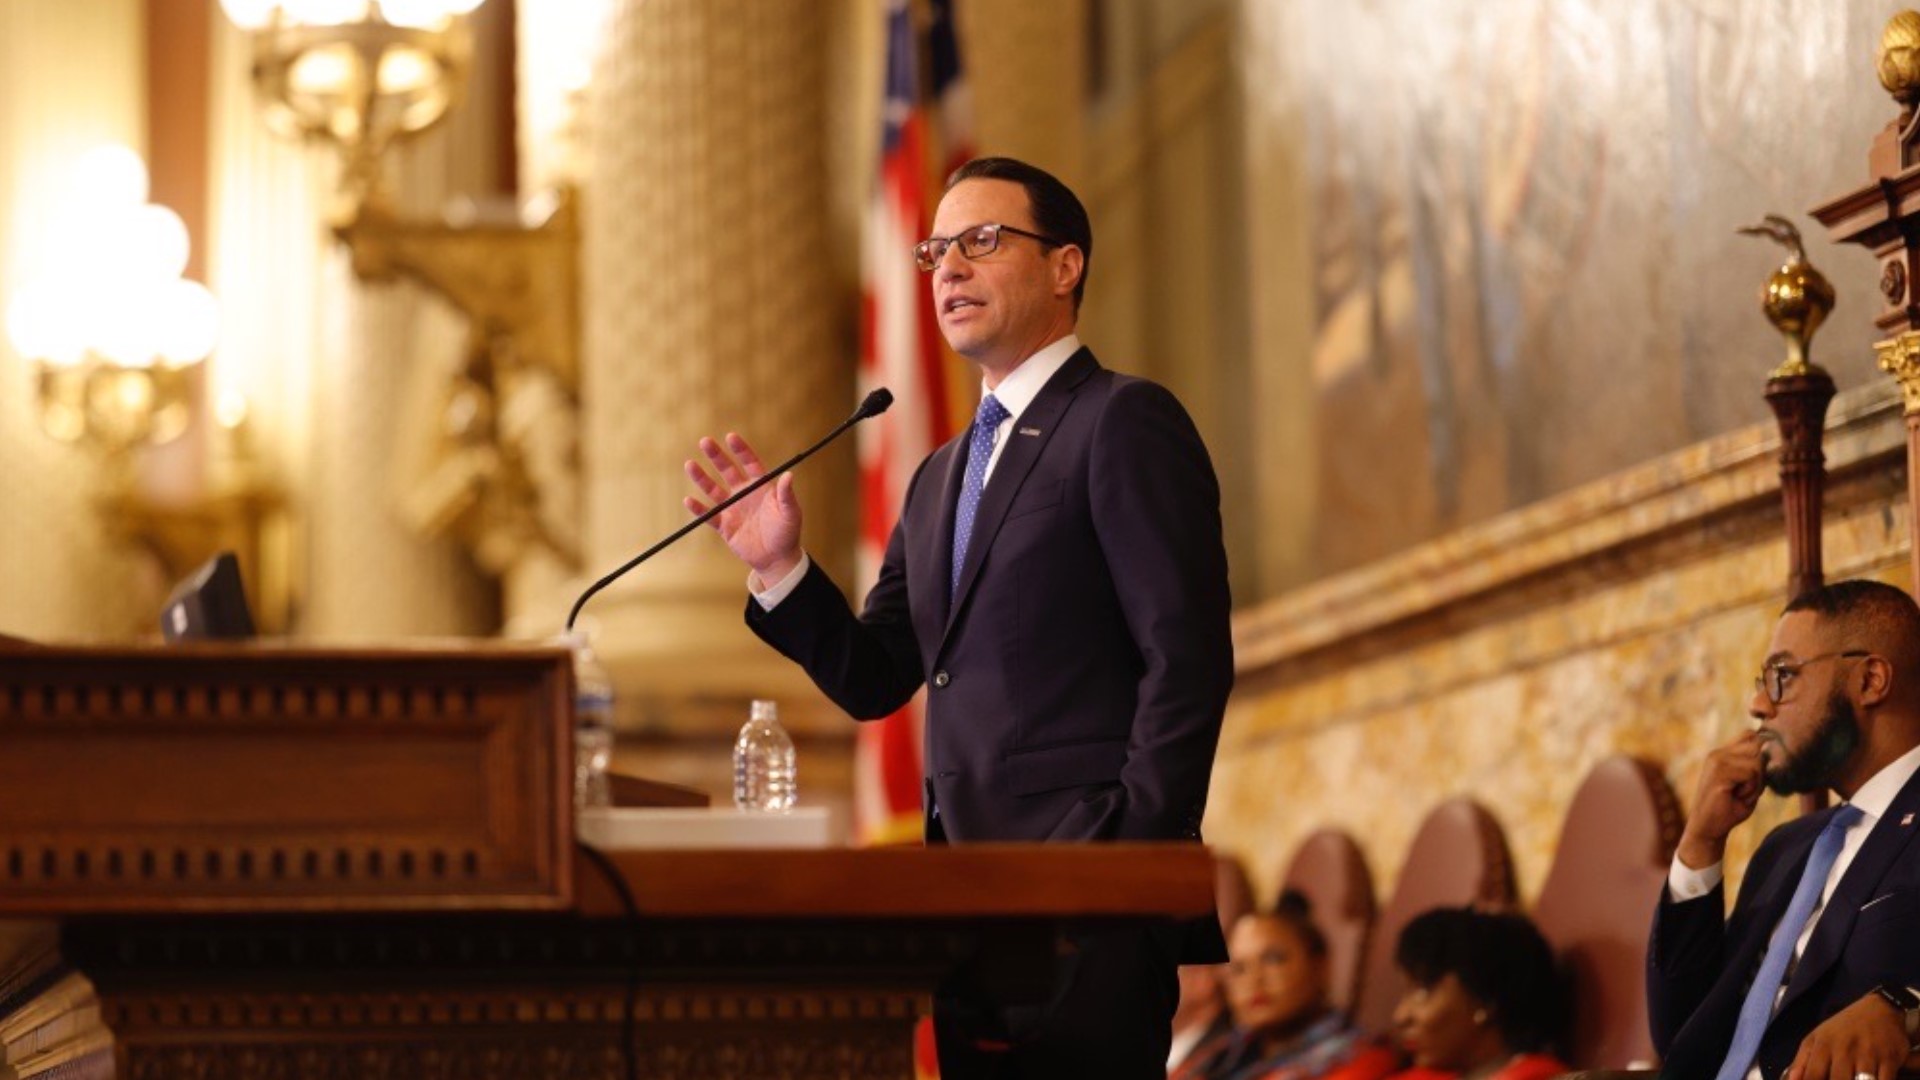 Gov. Shapiro gave his first budget address as governor Tuesday, revealing largely bipartisan priorities like education and fiscal responsibility.